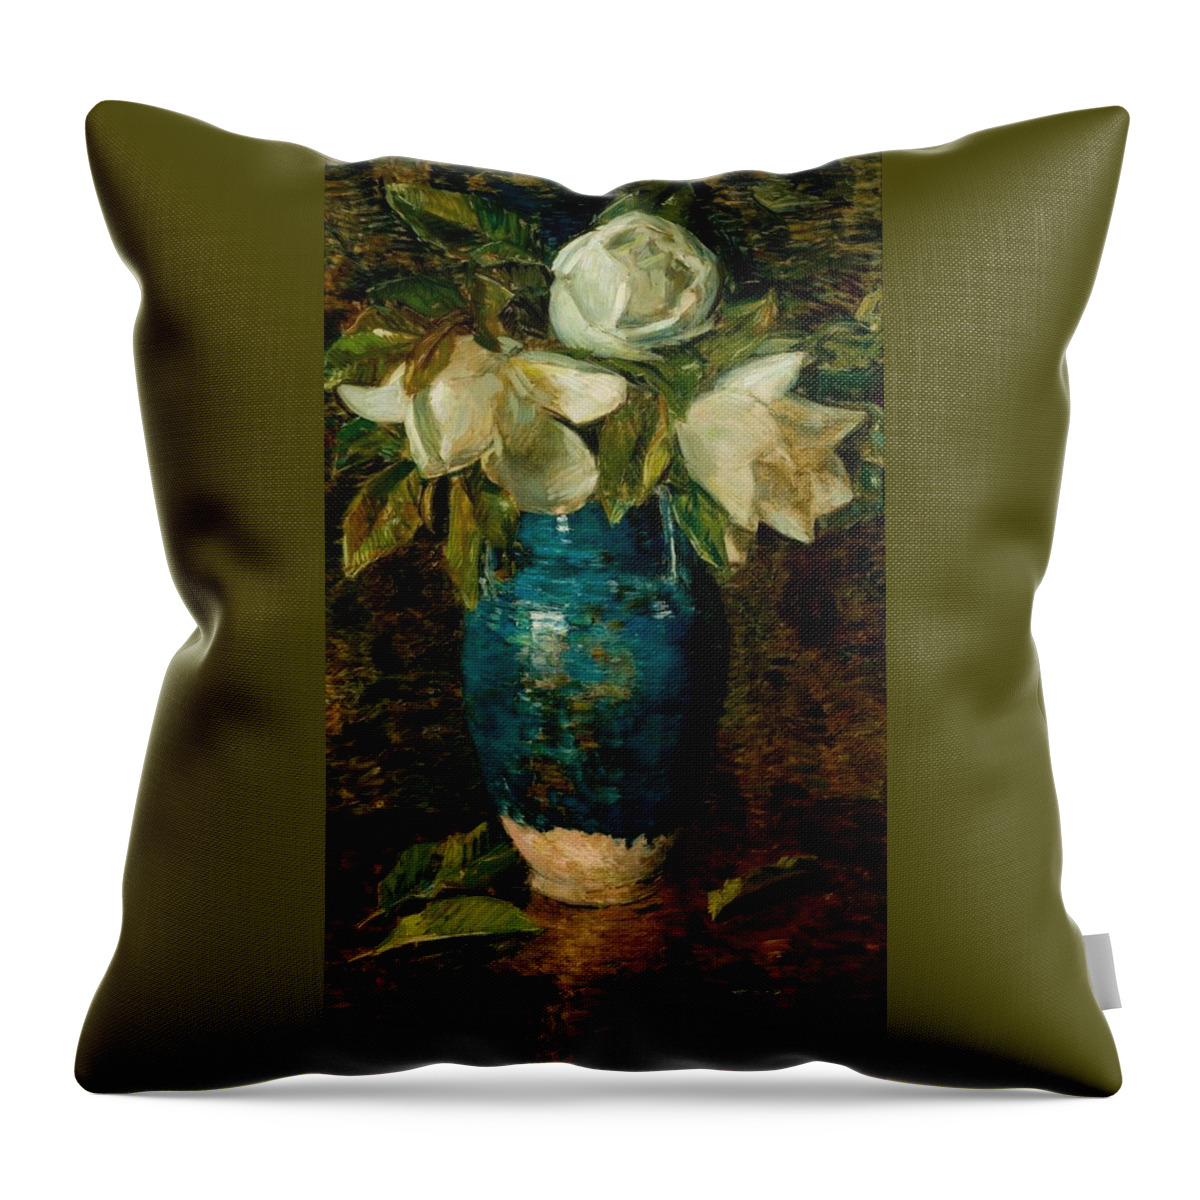 Giant Magnolias Throw Pillow featuring the painting Giant Magnolias by Childe Hassam